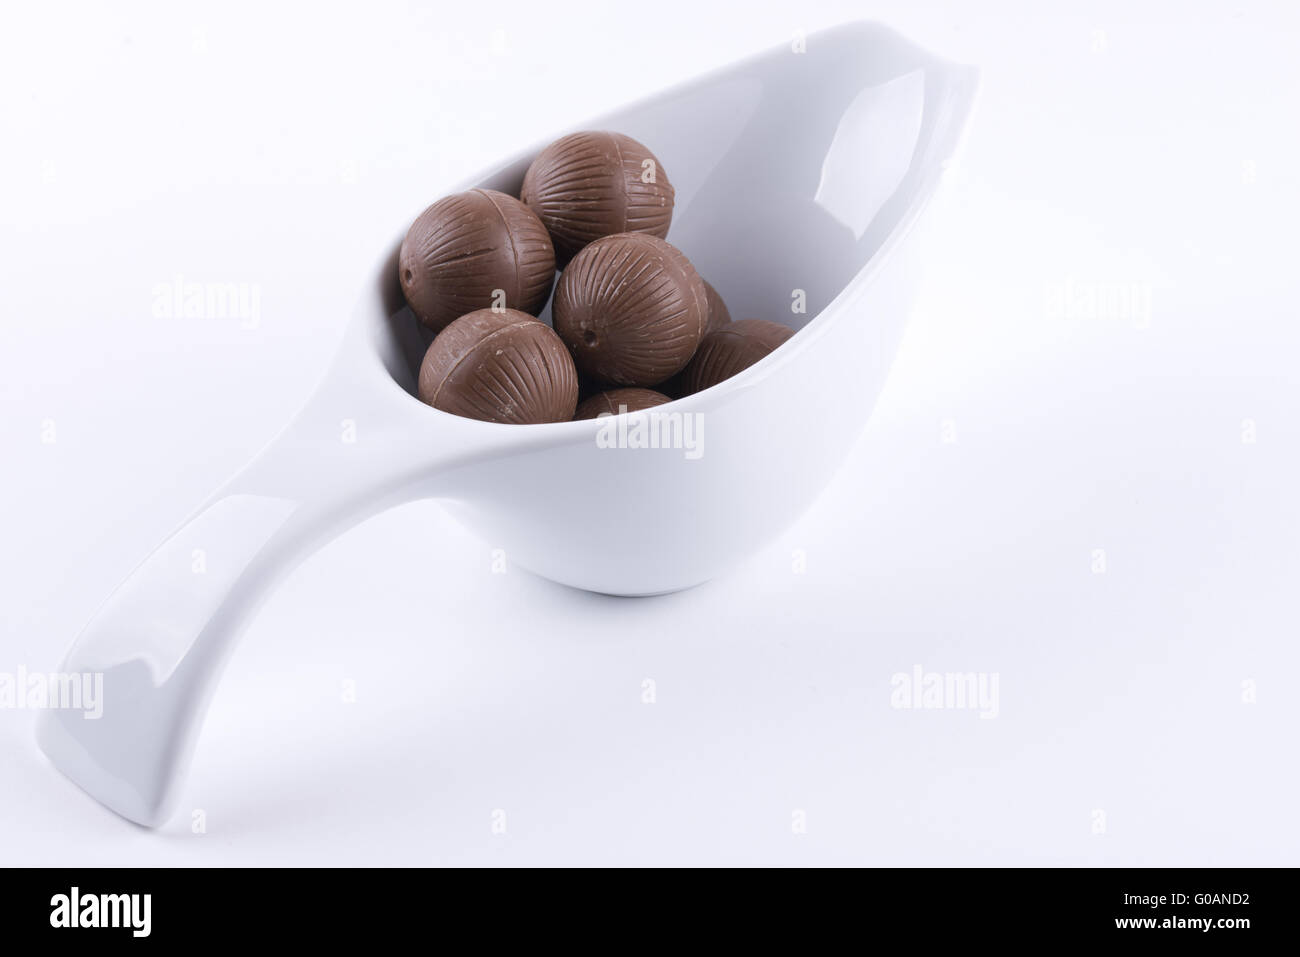 Chocolate balls in a white bowl Stock Photo